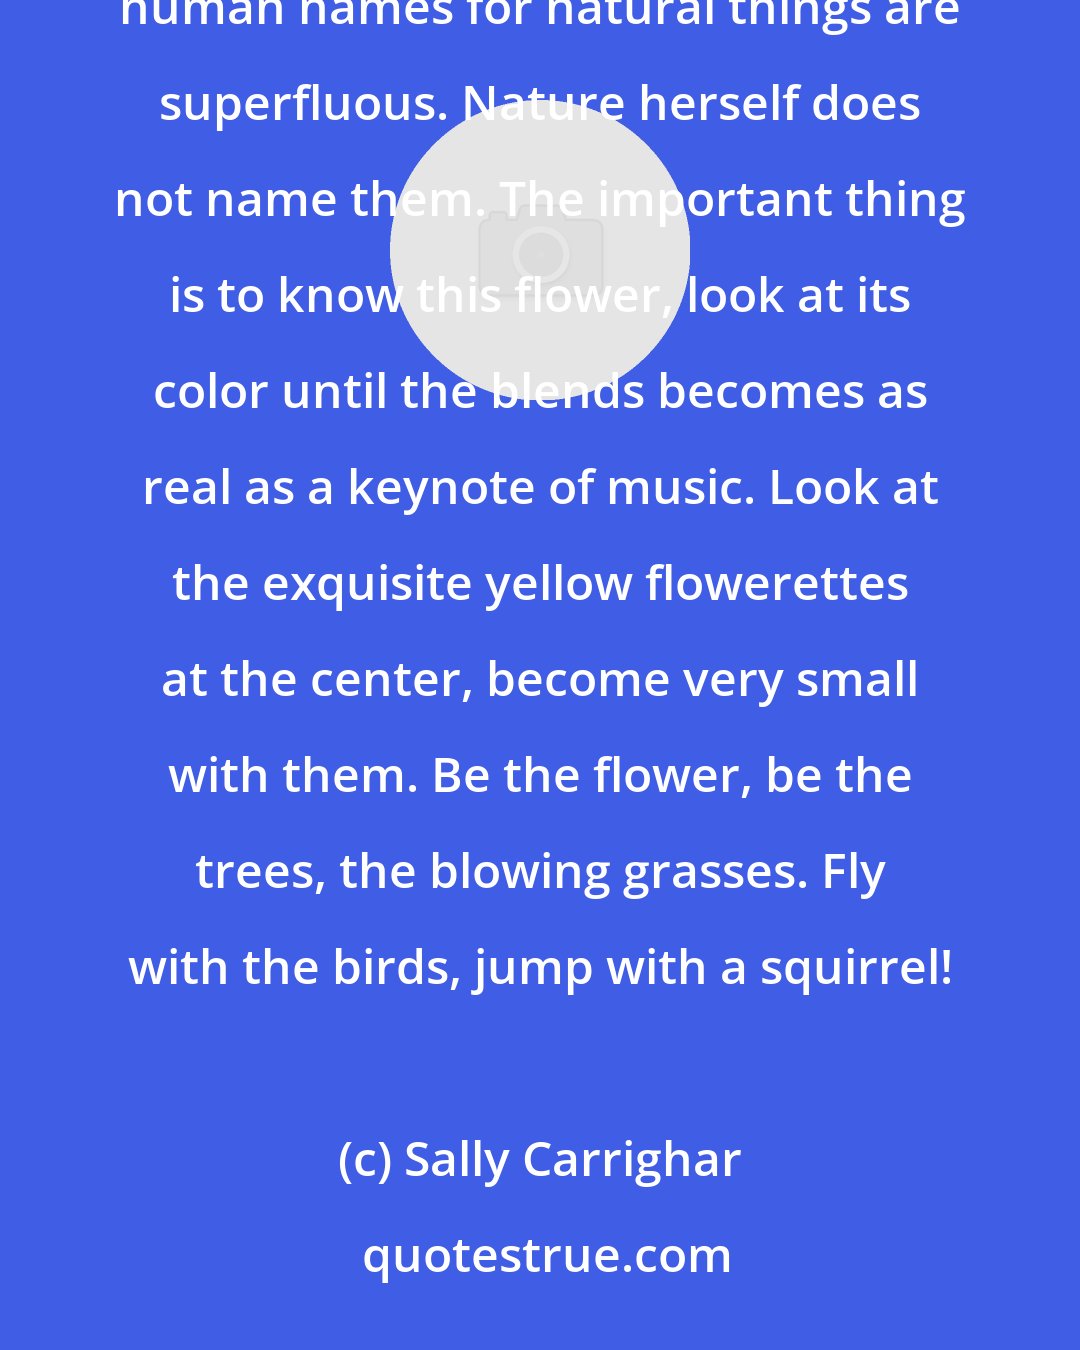 Sally Carrighar: I held a blue flower in my hand, probably a wild aster, wondering what its name was, and then thought that human names for natural things are superfluous. Nature herself does not name them. The important thing is to know this flower, look at its color until the blends becomes as real as a keynote of music. Look at the exquisite yellow flowerettes at the center, become very small with them. Be the flower, be the trees, the blowing grasses. Fly with the birds, jump with a squirrel!